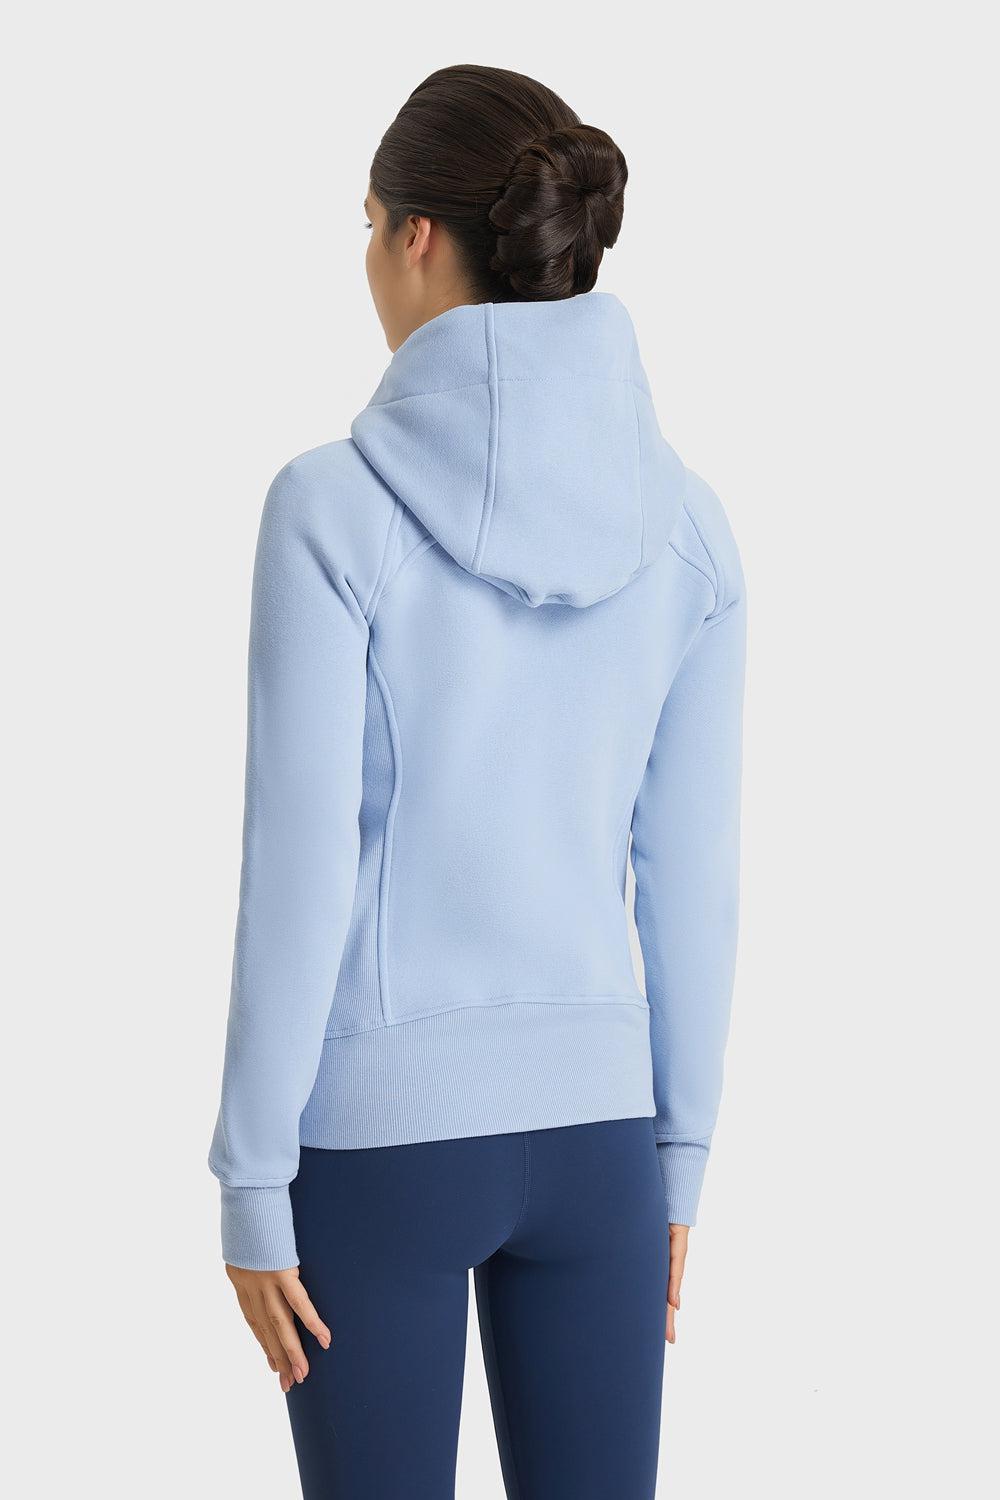 Zip Up Seam Detail Hooded Sports Jacket BLUE ZONE PLANET